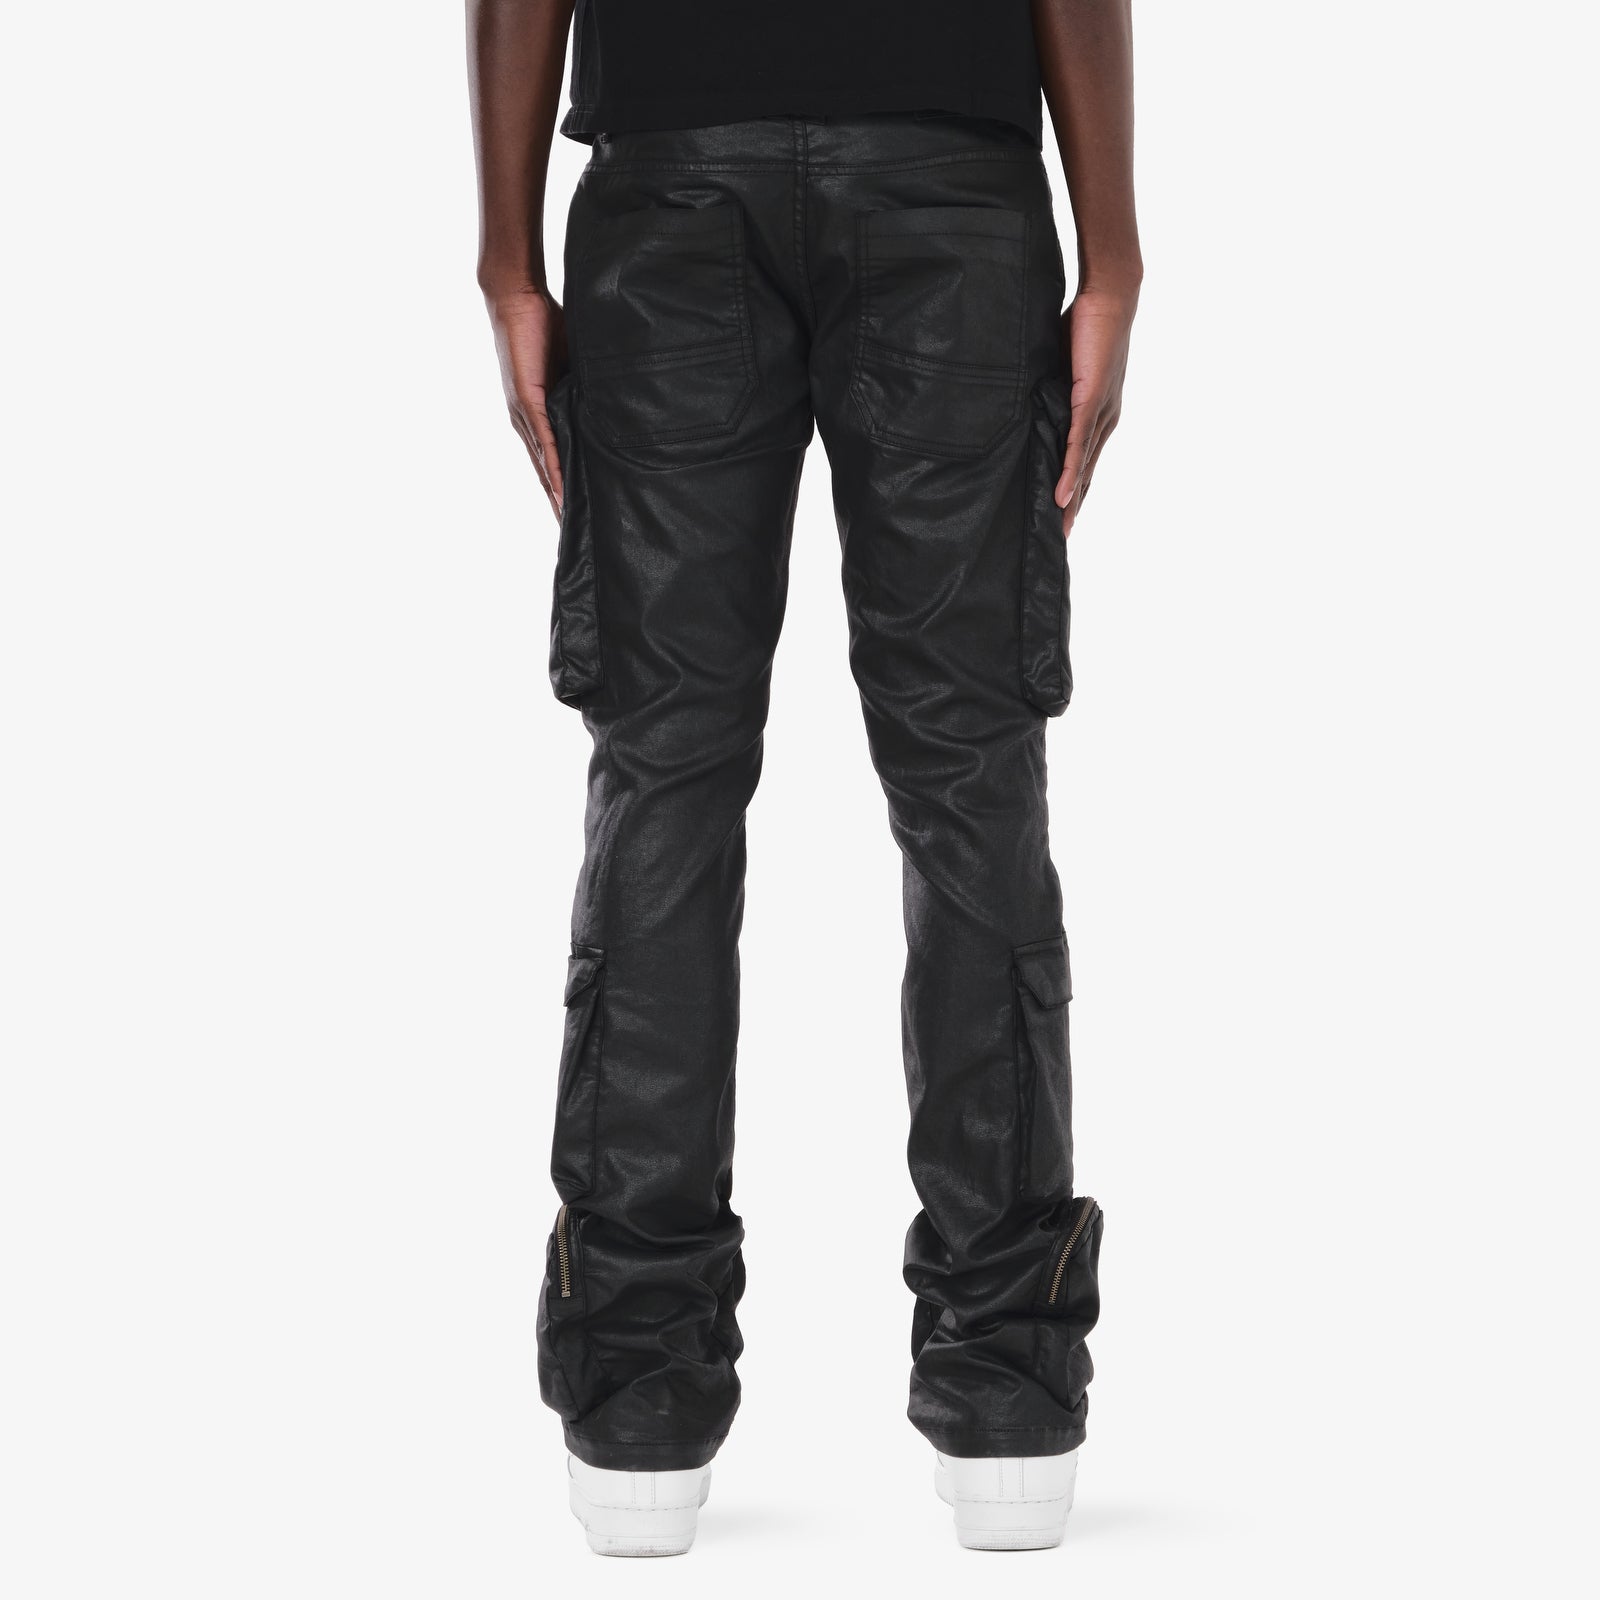 JET BLACK WAXED STACKED CARGO JEANS